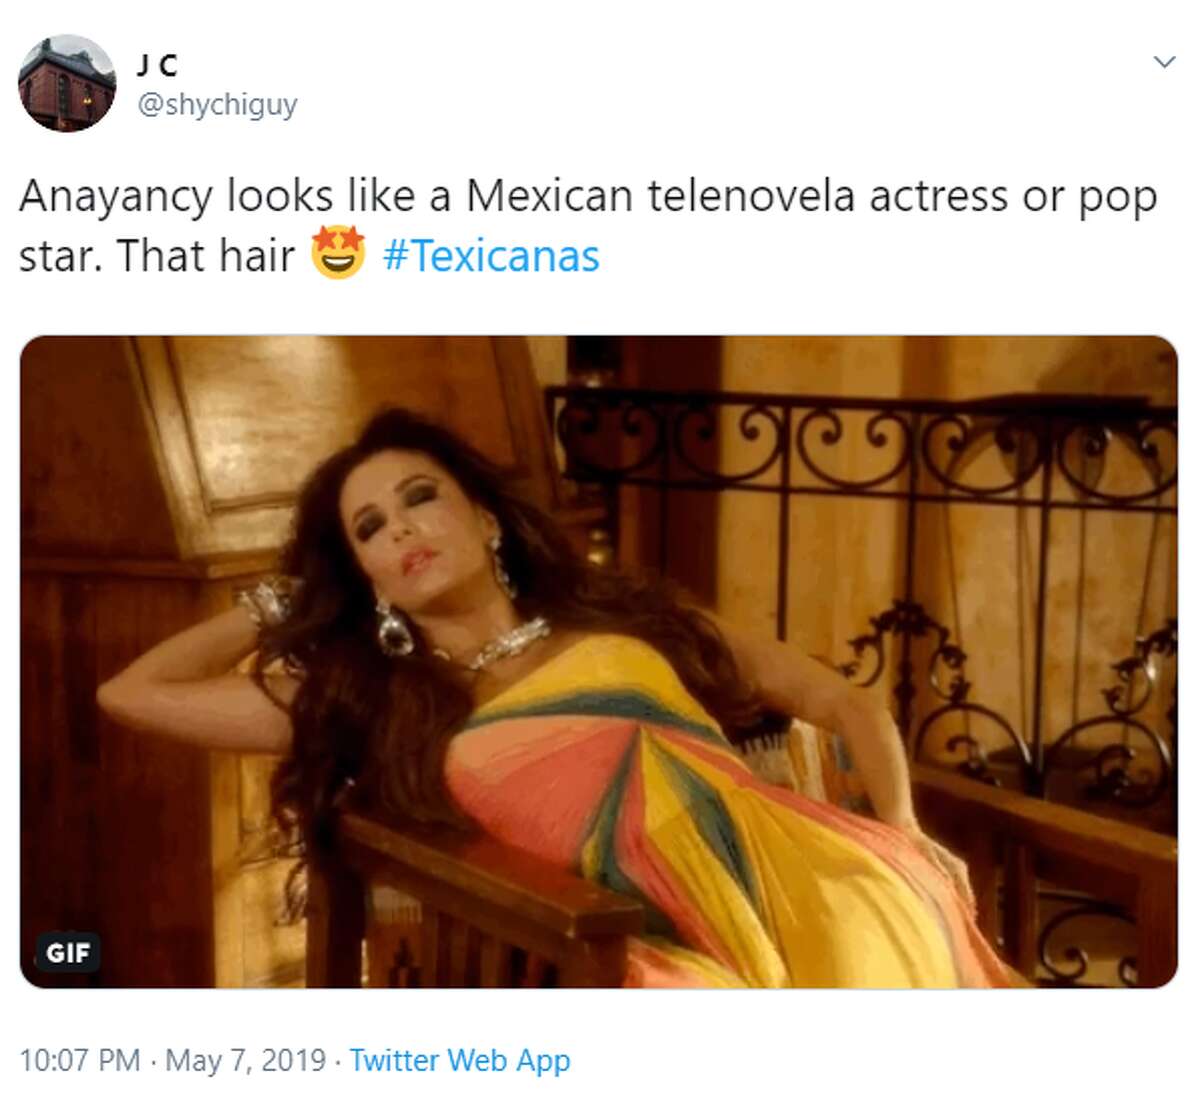 @shychiguy: Anayancy looks like a Mexican telenovela actress or pop star. That hair #Texicanas